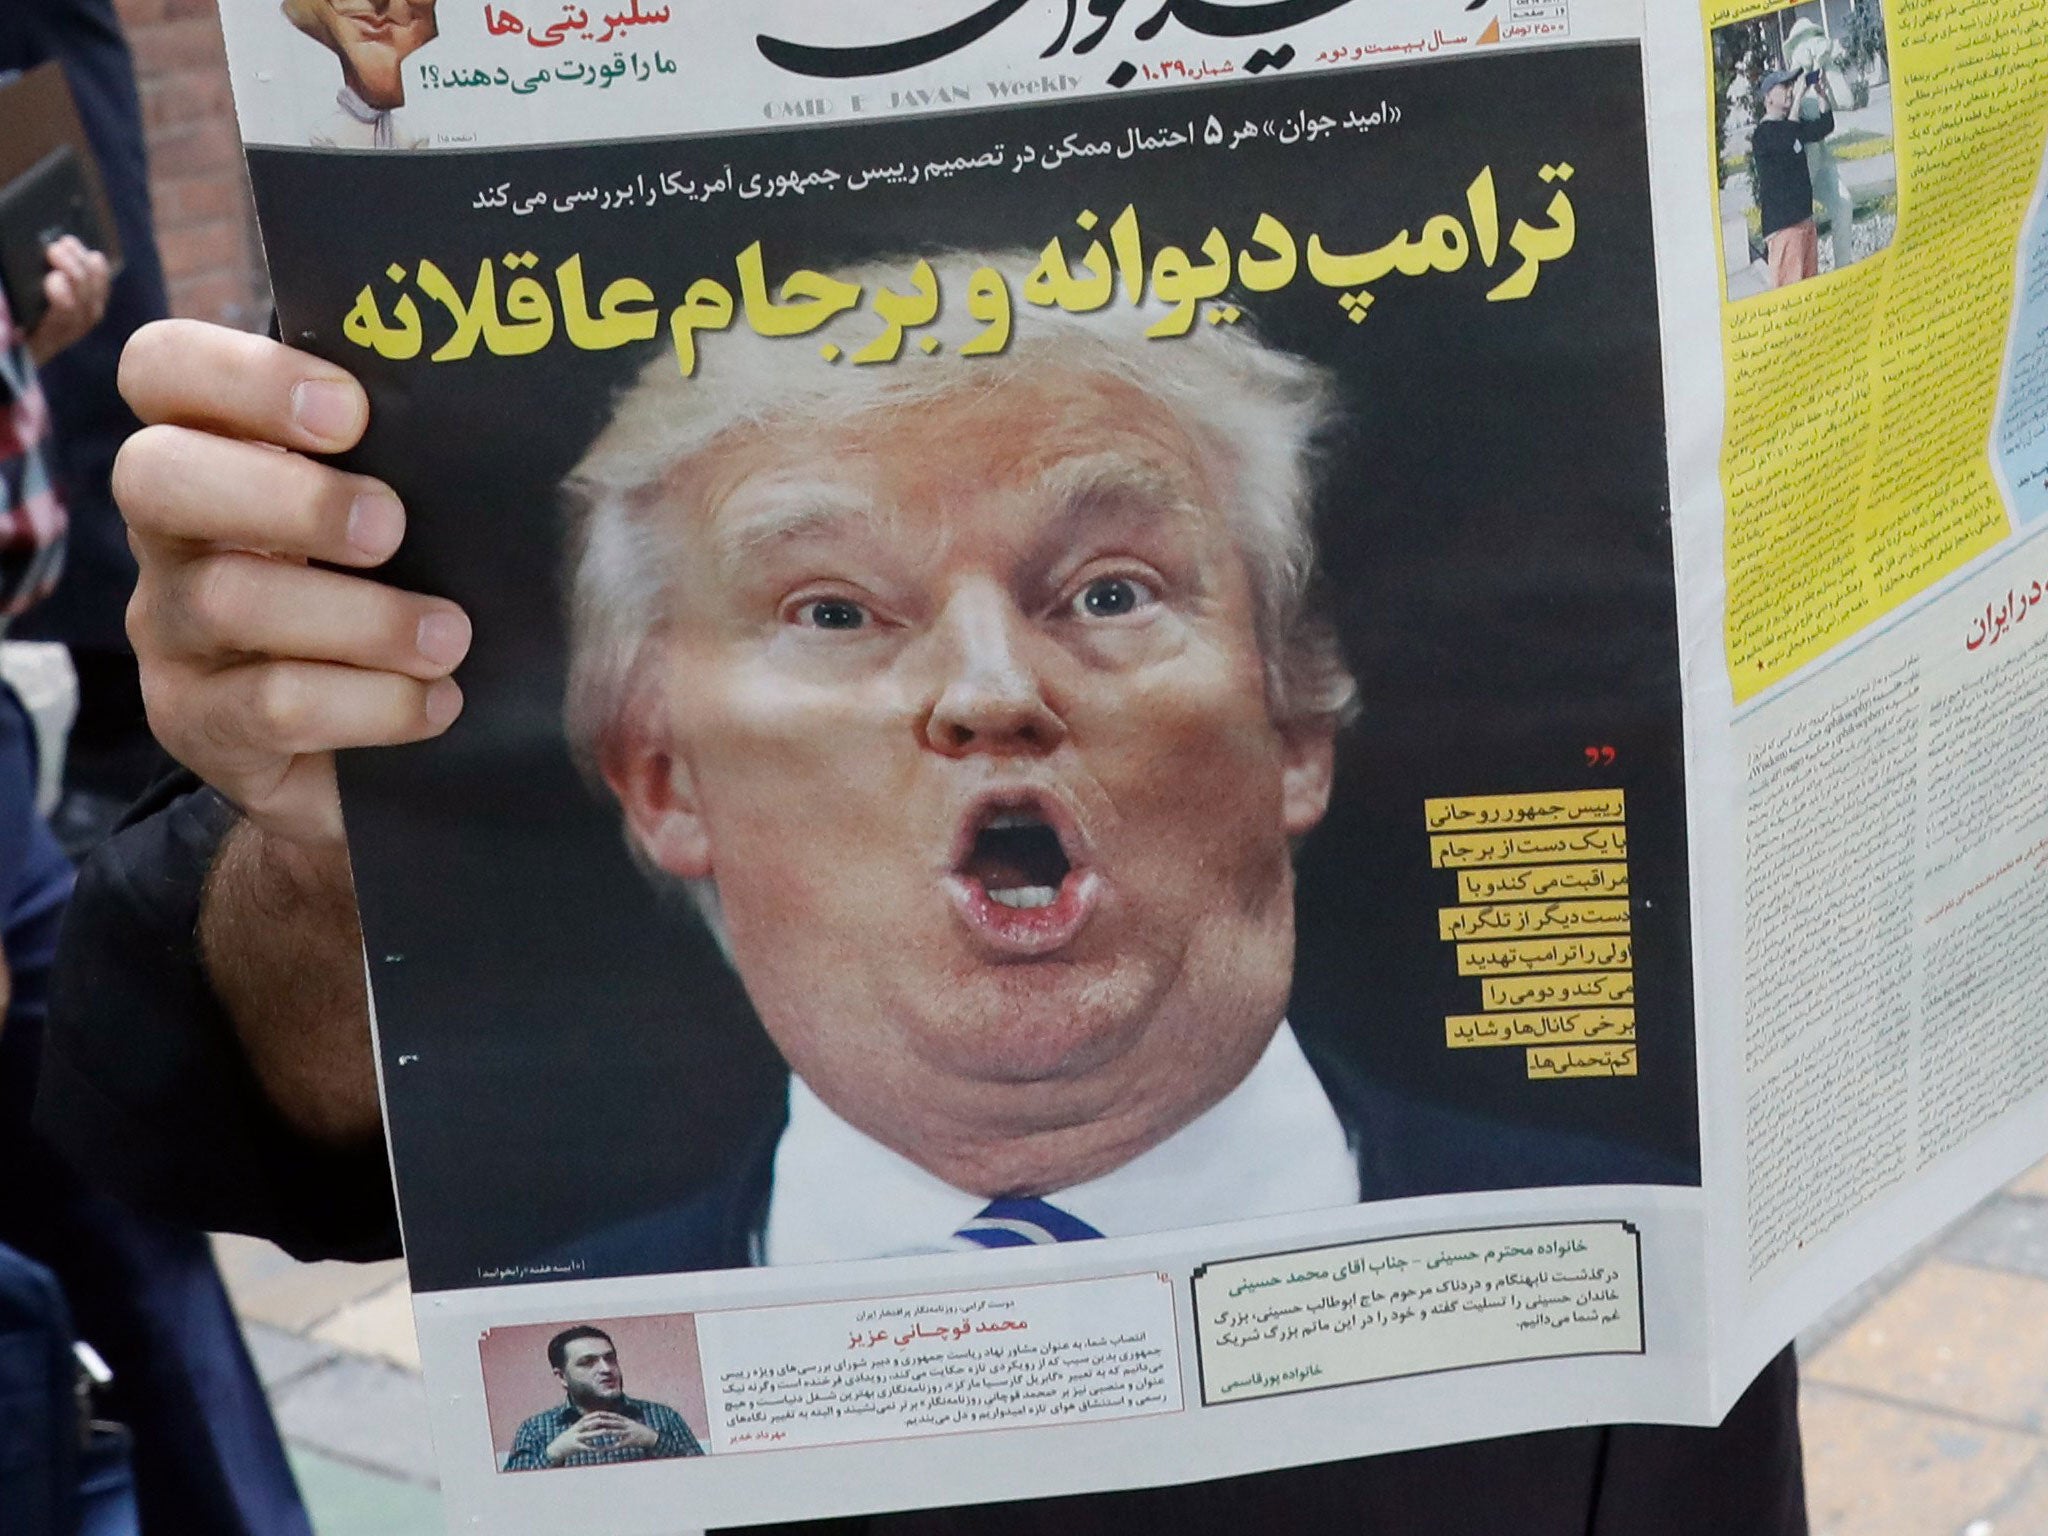 The headline in Iranian daily newspaper ‘Arman’ reads ‘Crazy Trump and logical JCPOA’